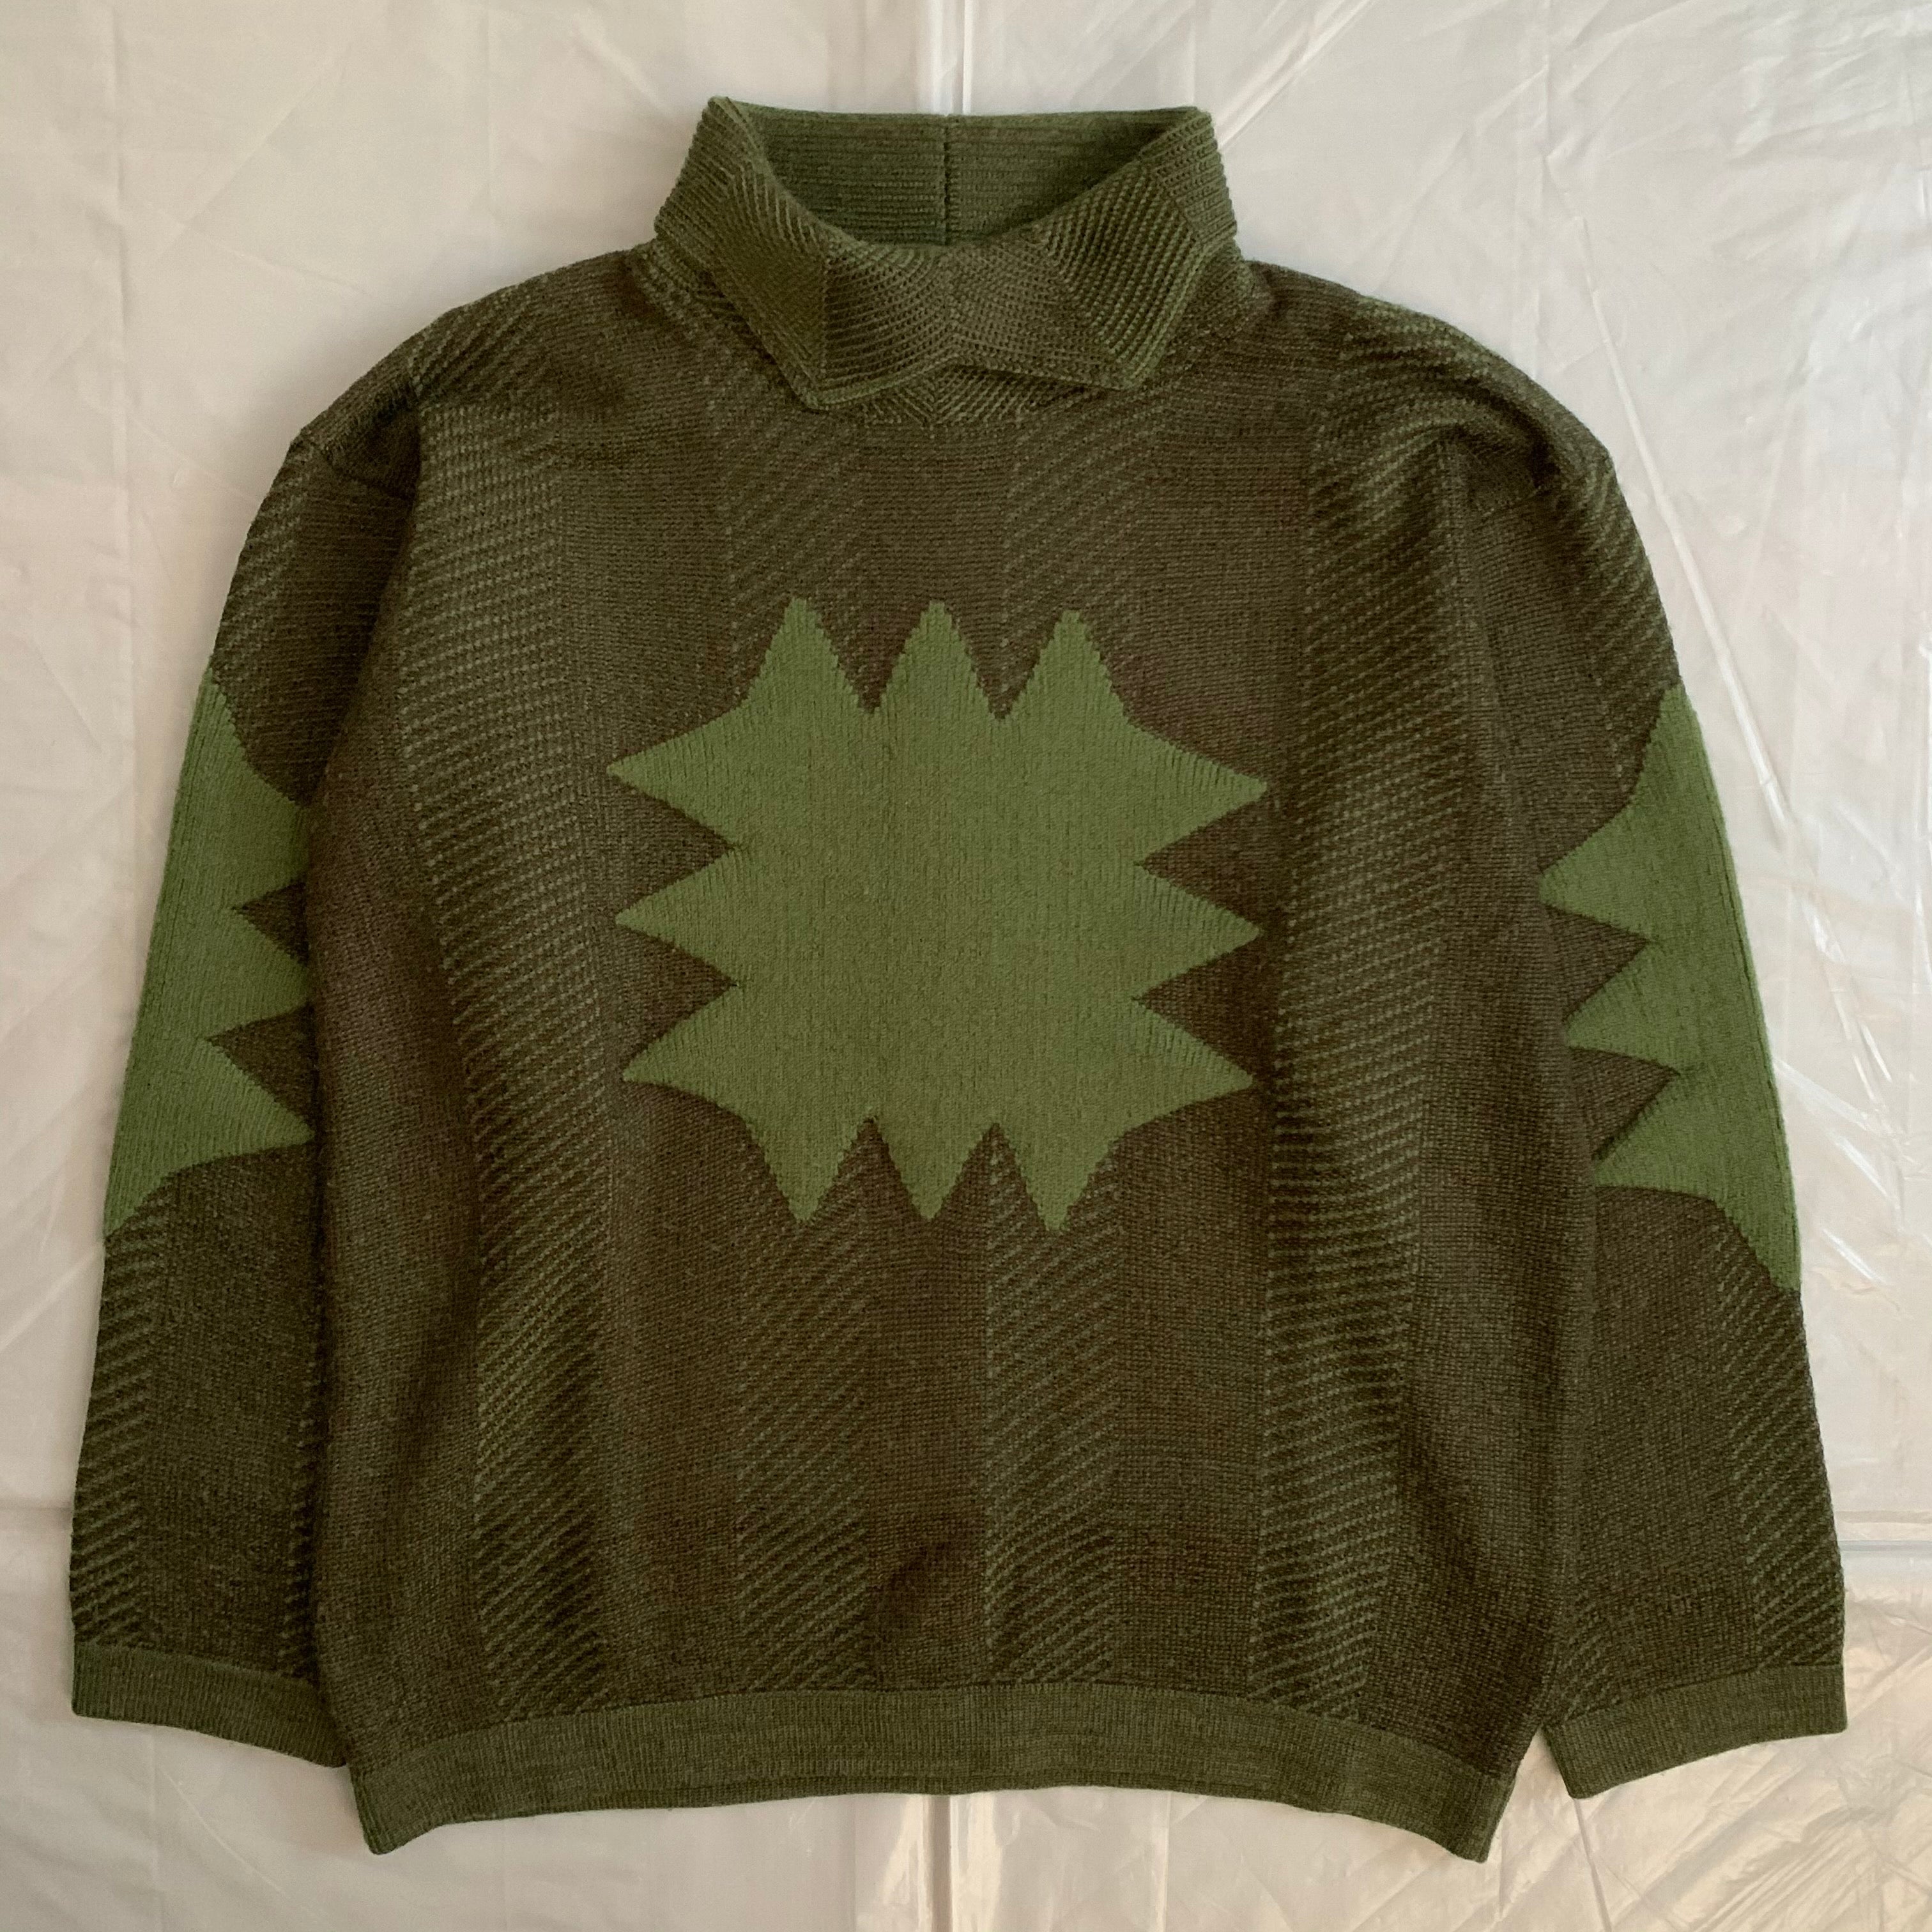 1980s Issey Miyake Green Wool Turtleneck Sweater with Embossed Graphic - Size L